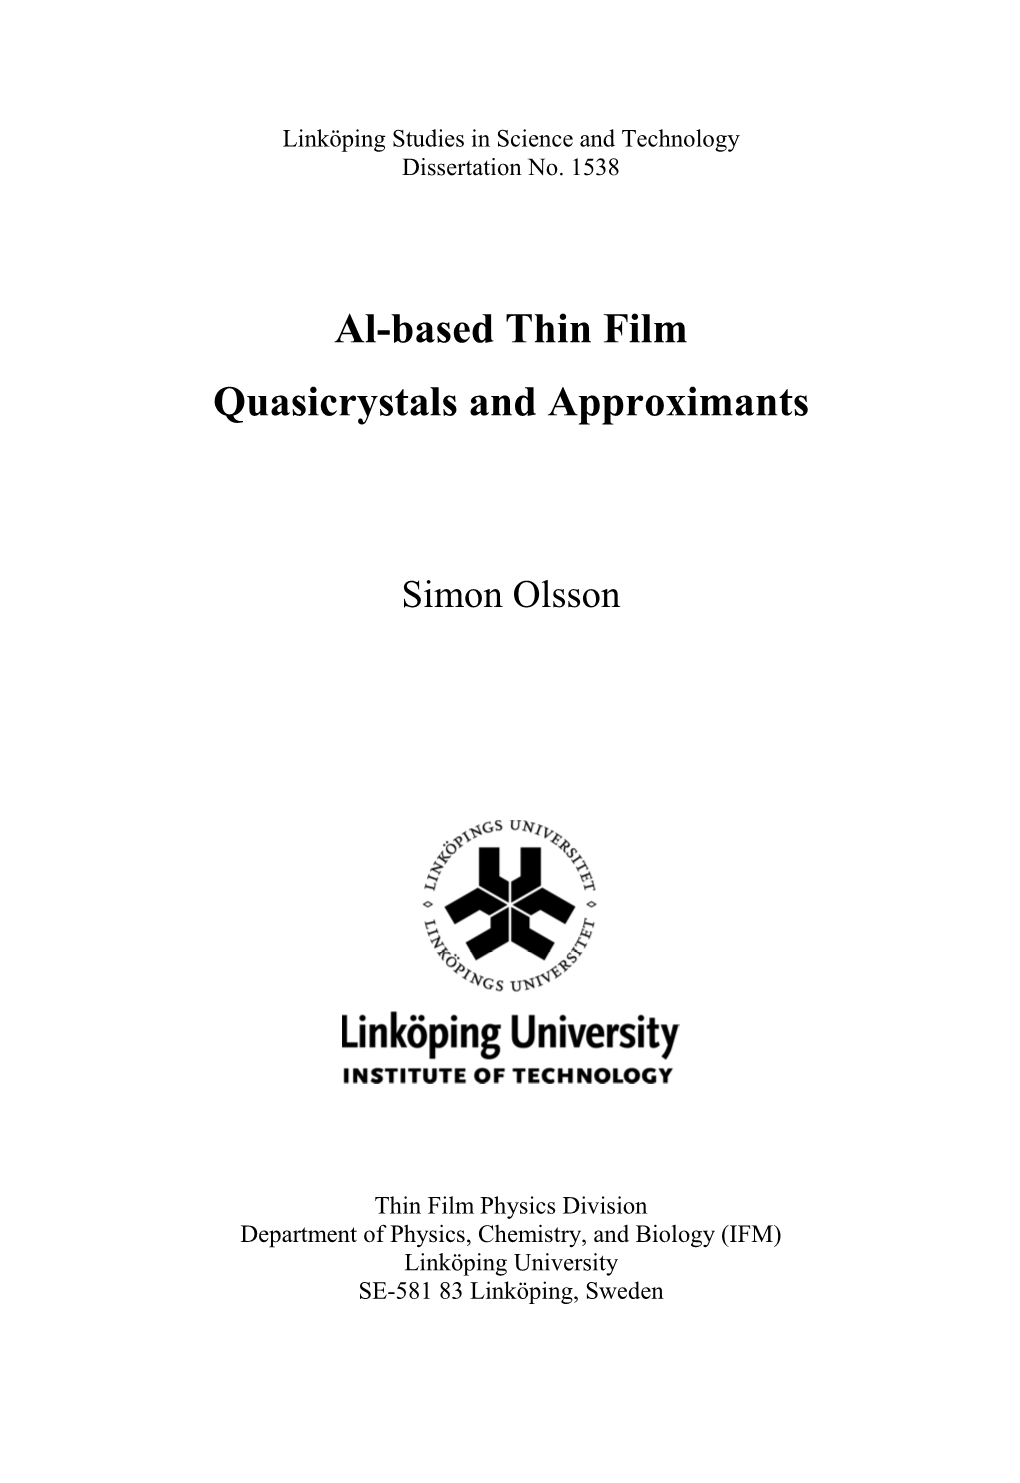 Al-Based Thin Film Quasicrystals and Approximants